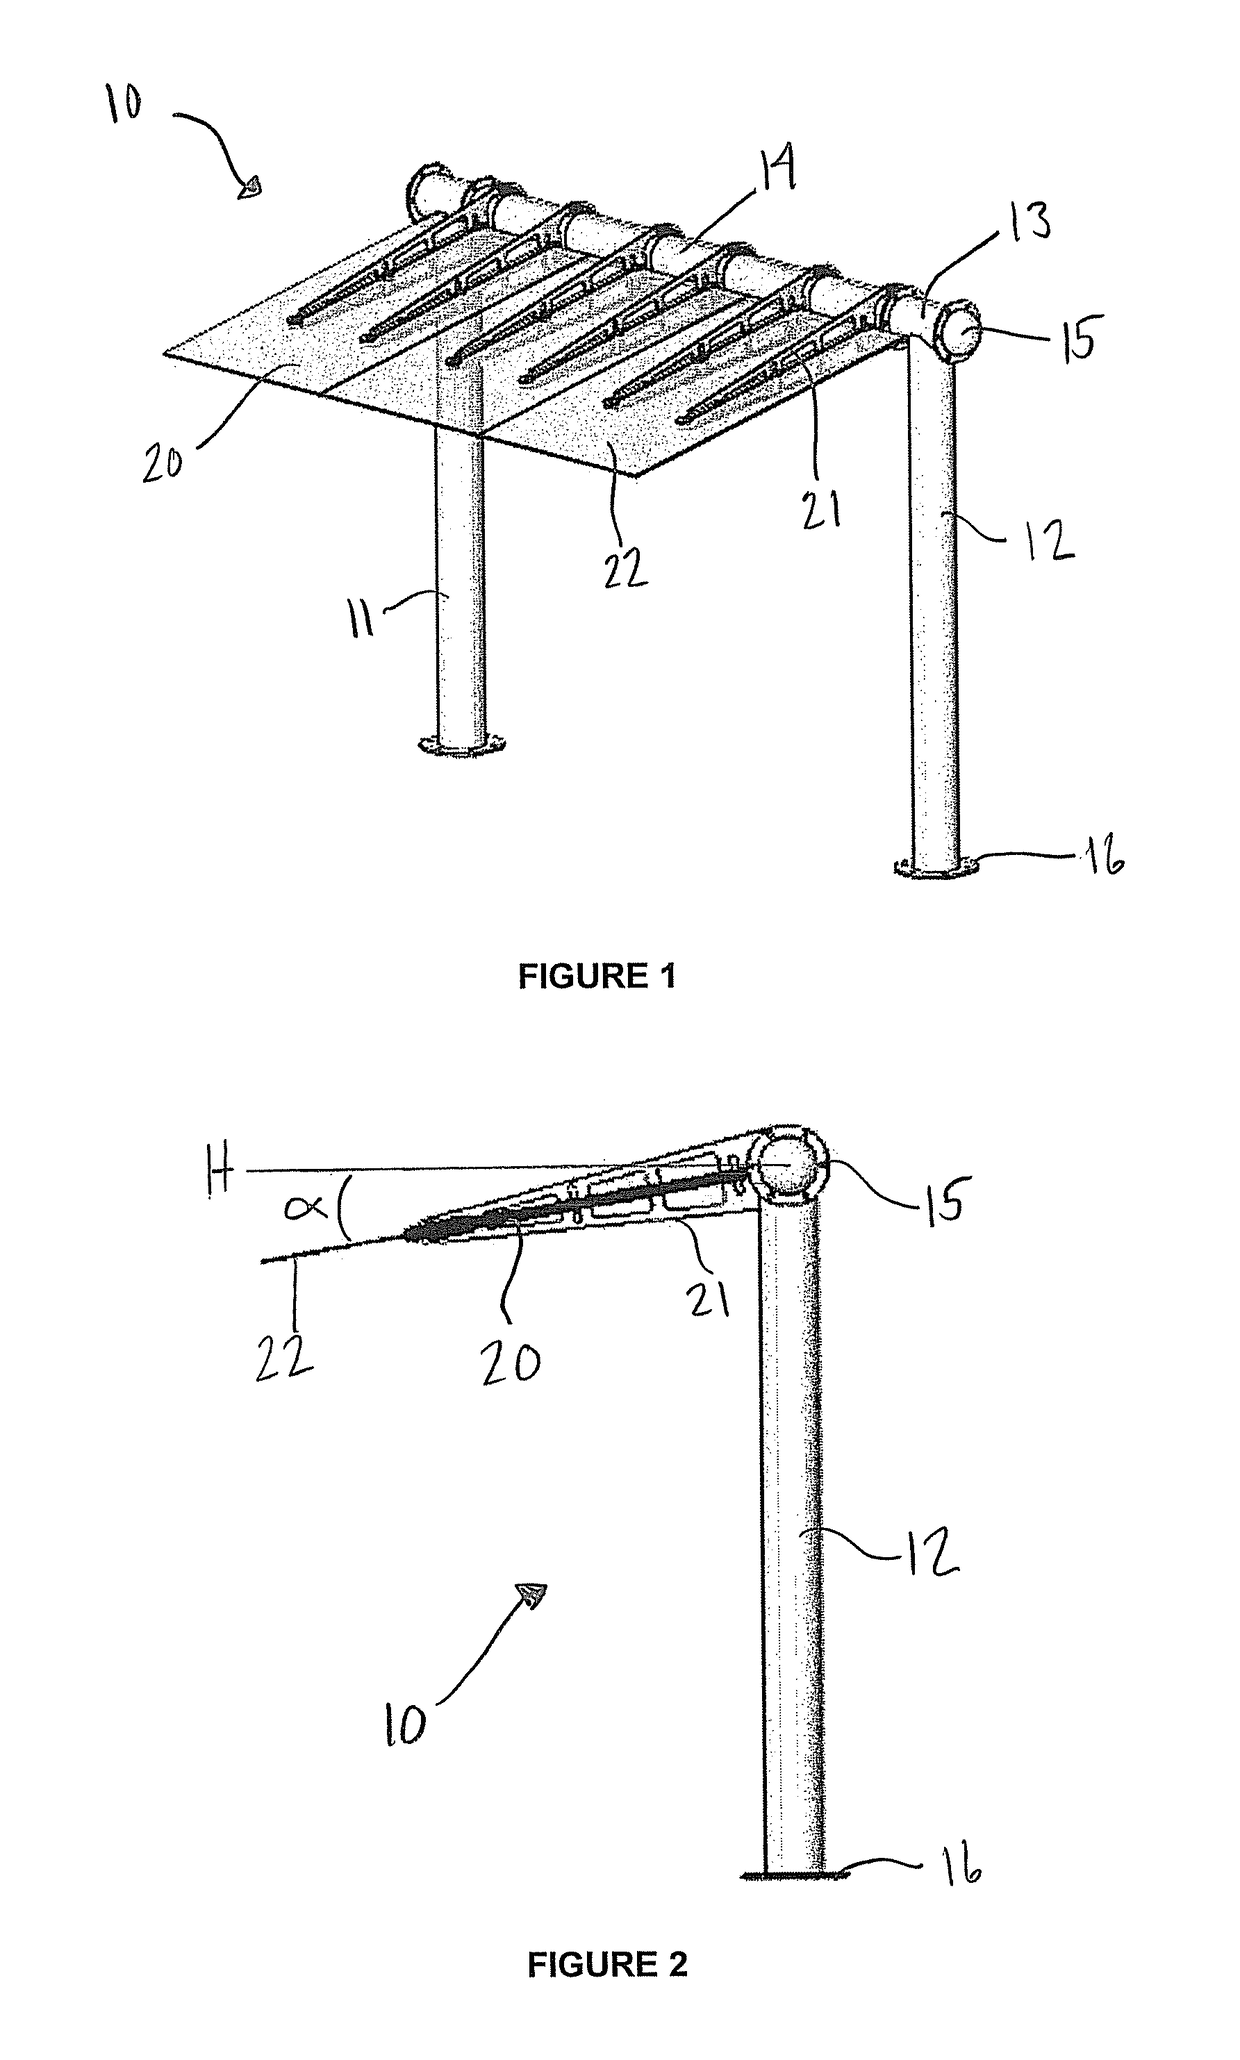 Bicycle shelter assembly